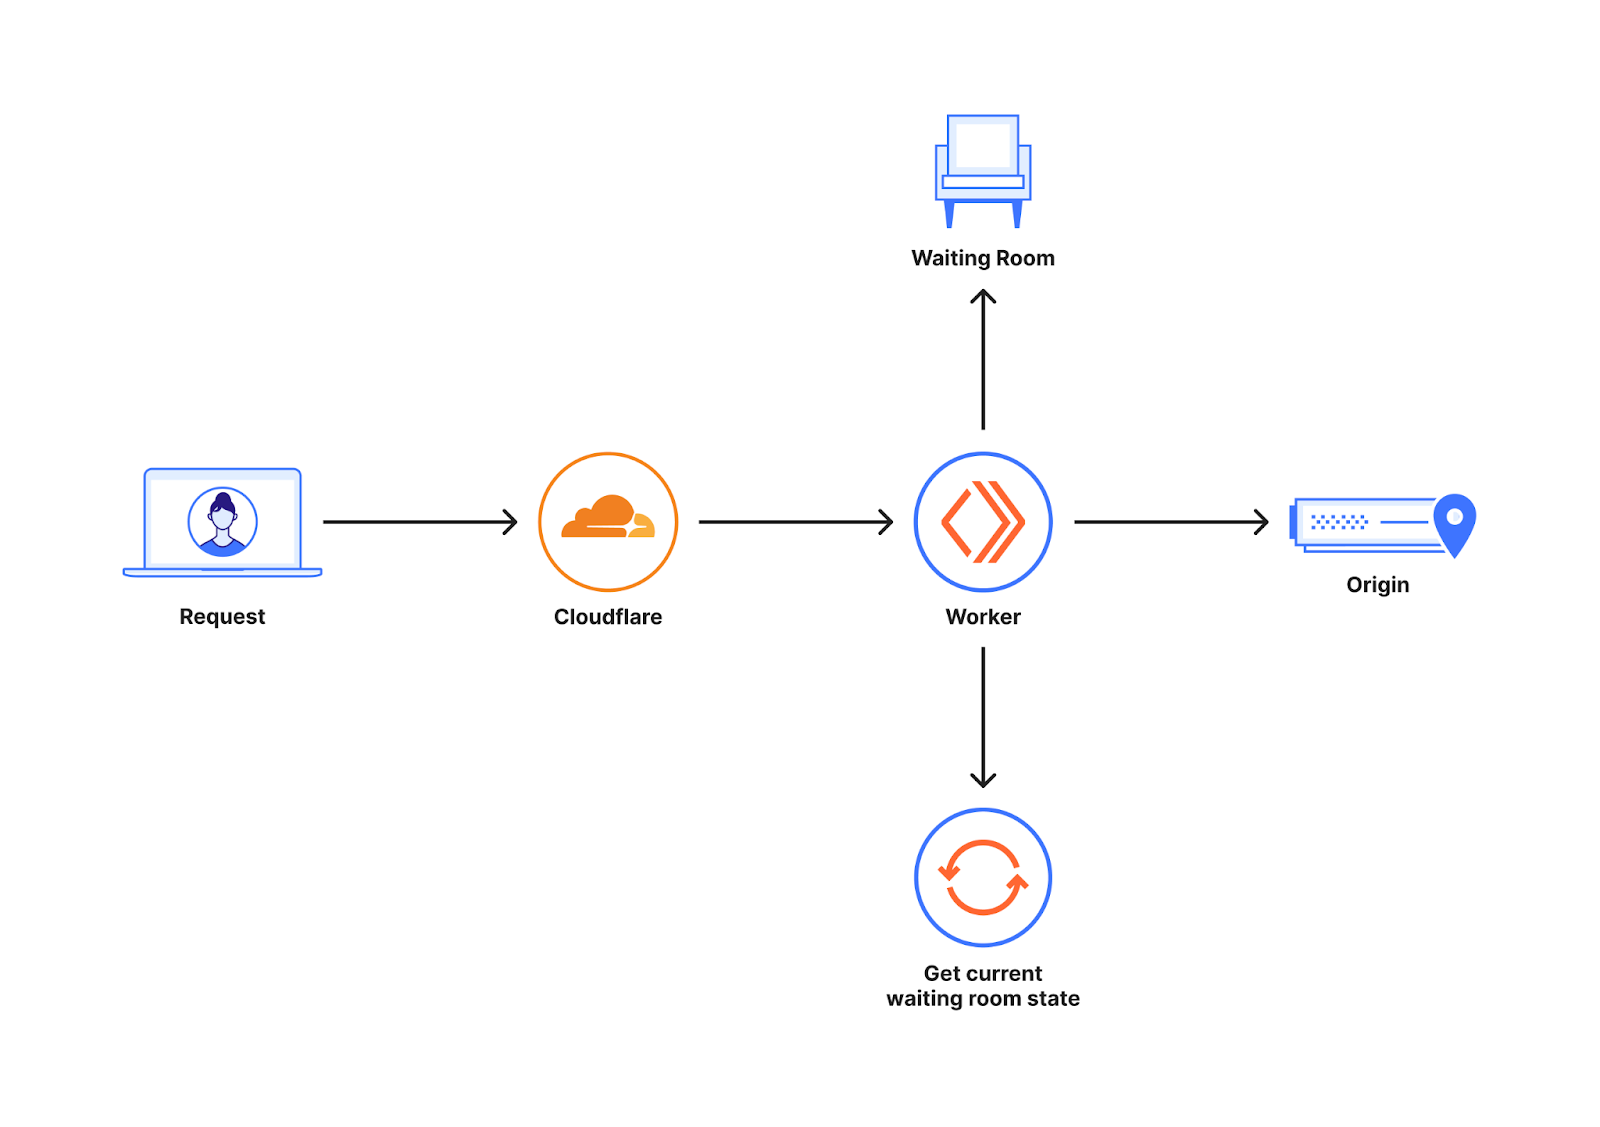 How Waiting Room makes queueing decisions on Cloudflare's highly distributed network